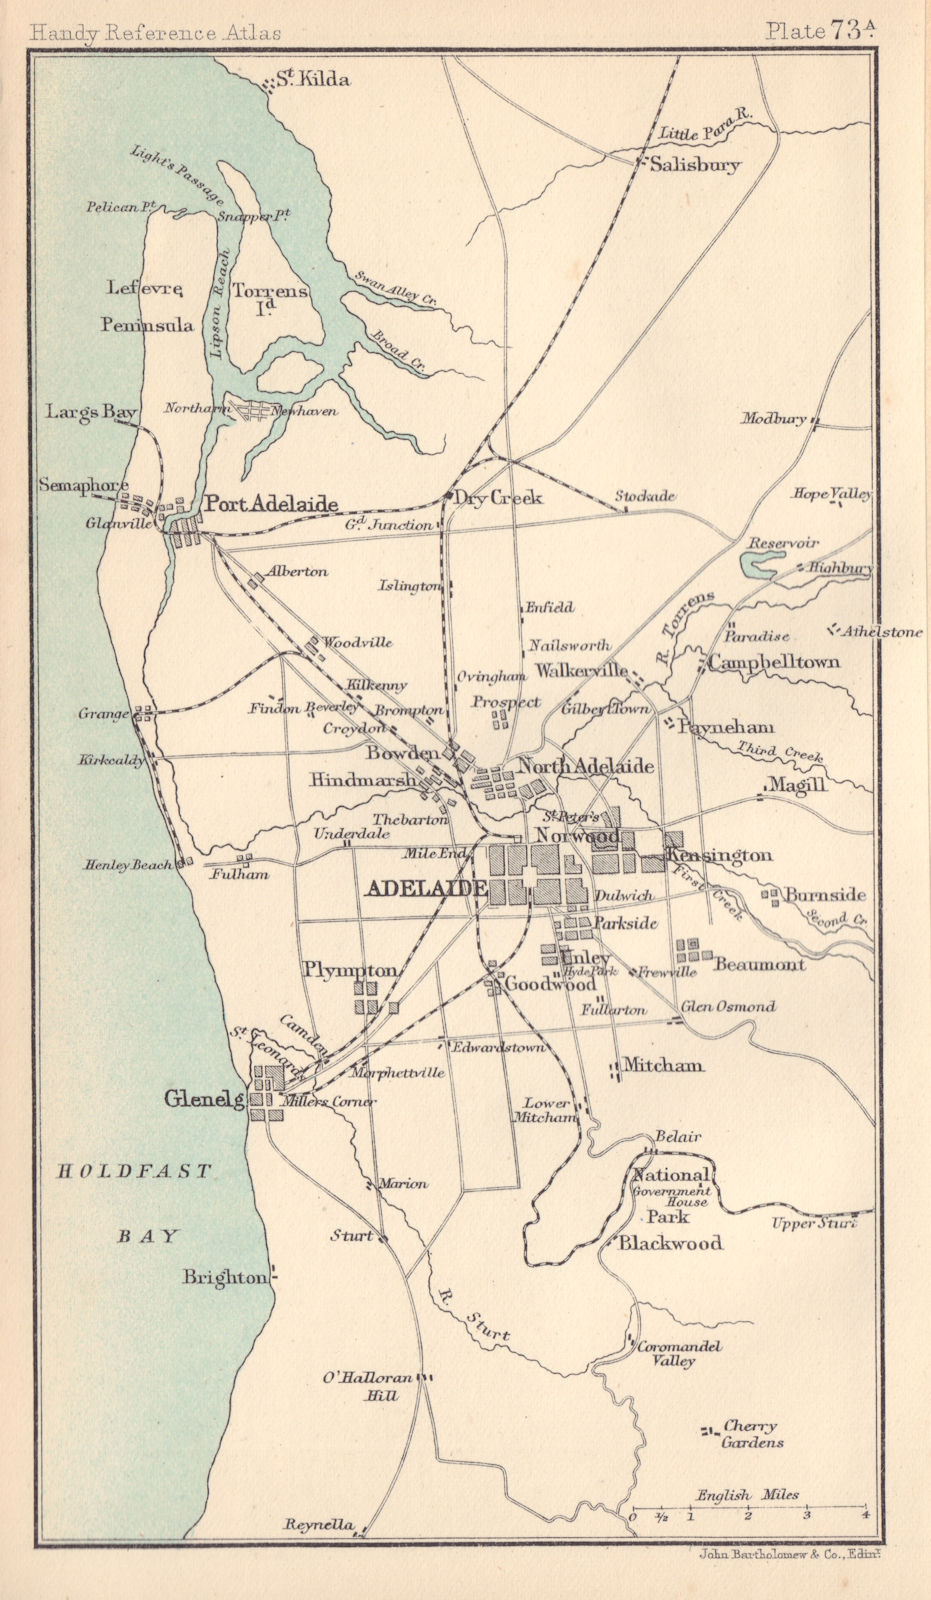 Associate Product Environs of Adelaide. South Australia. BARTHOLOMEW 1898 old antique map chart